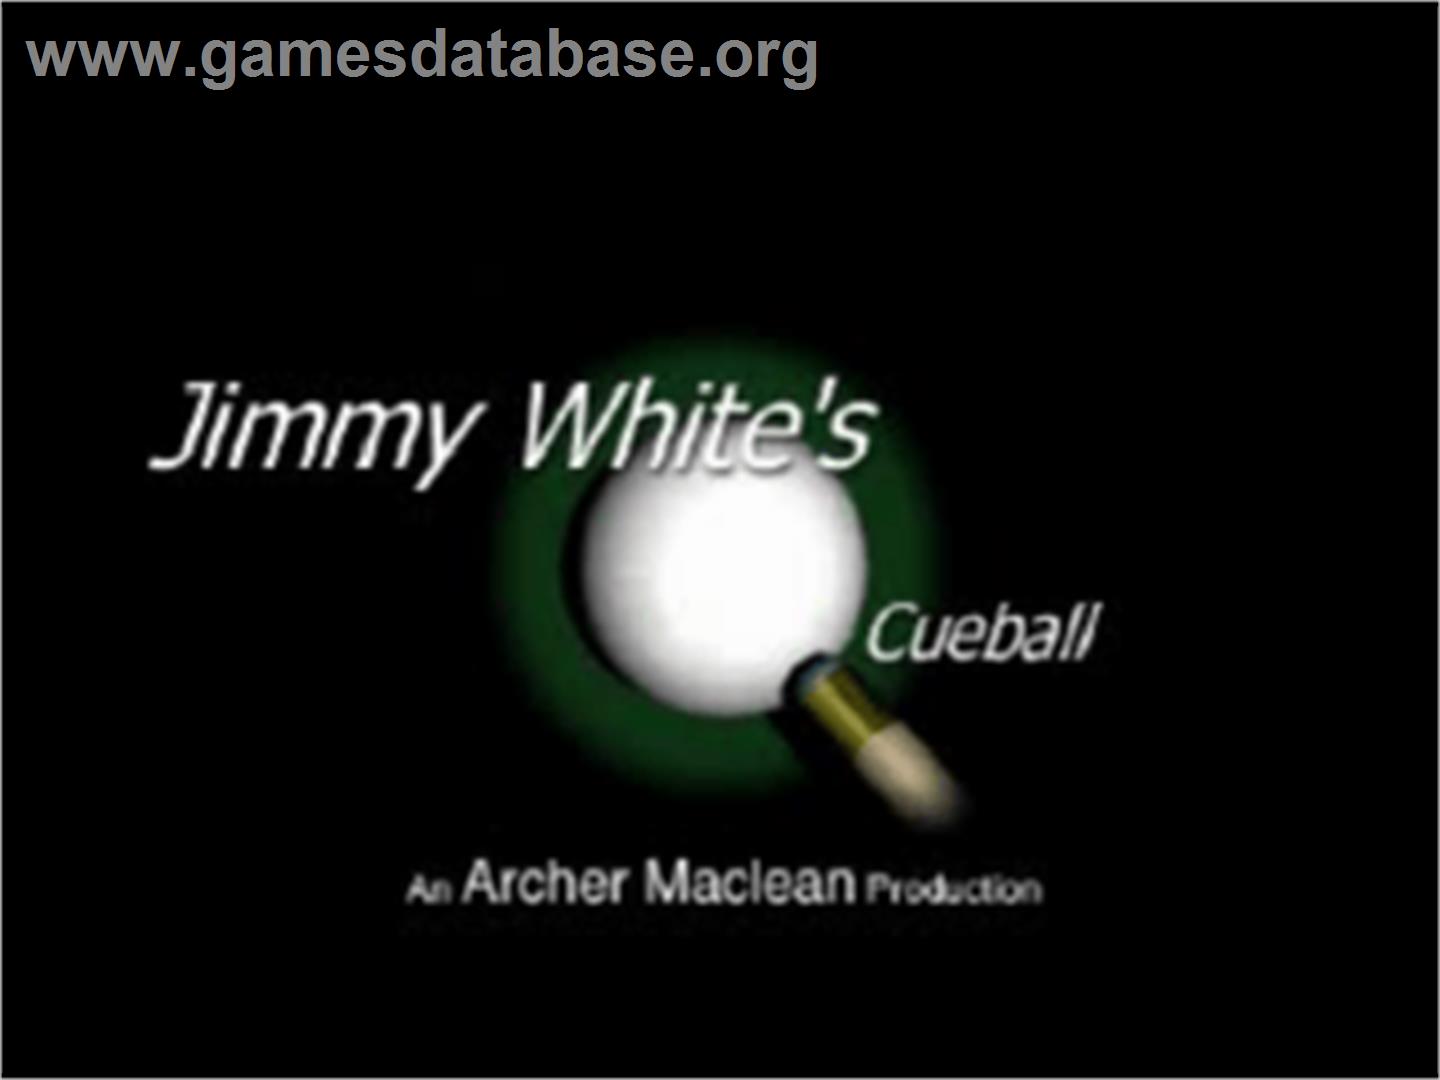 Jimmy White's 2: Cueball - Sony Playstation - Artwork - Title Screen